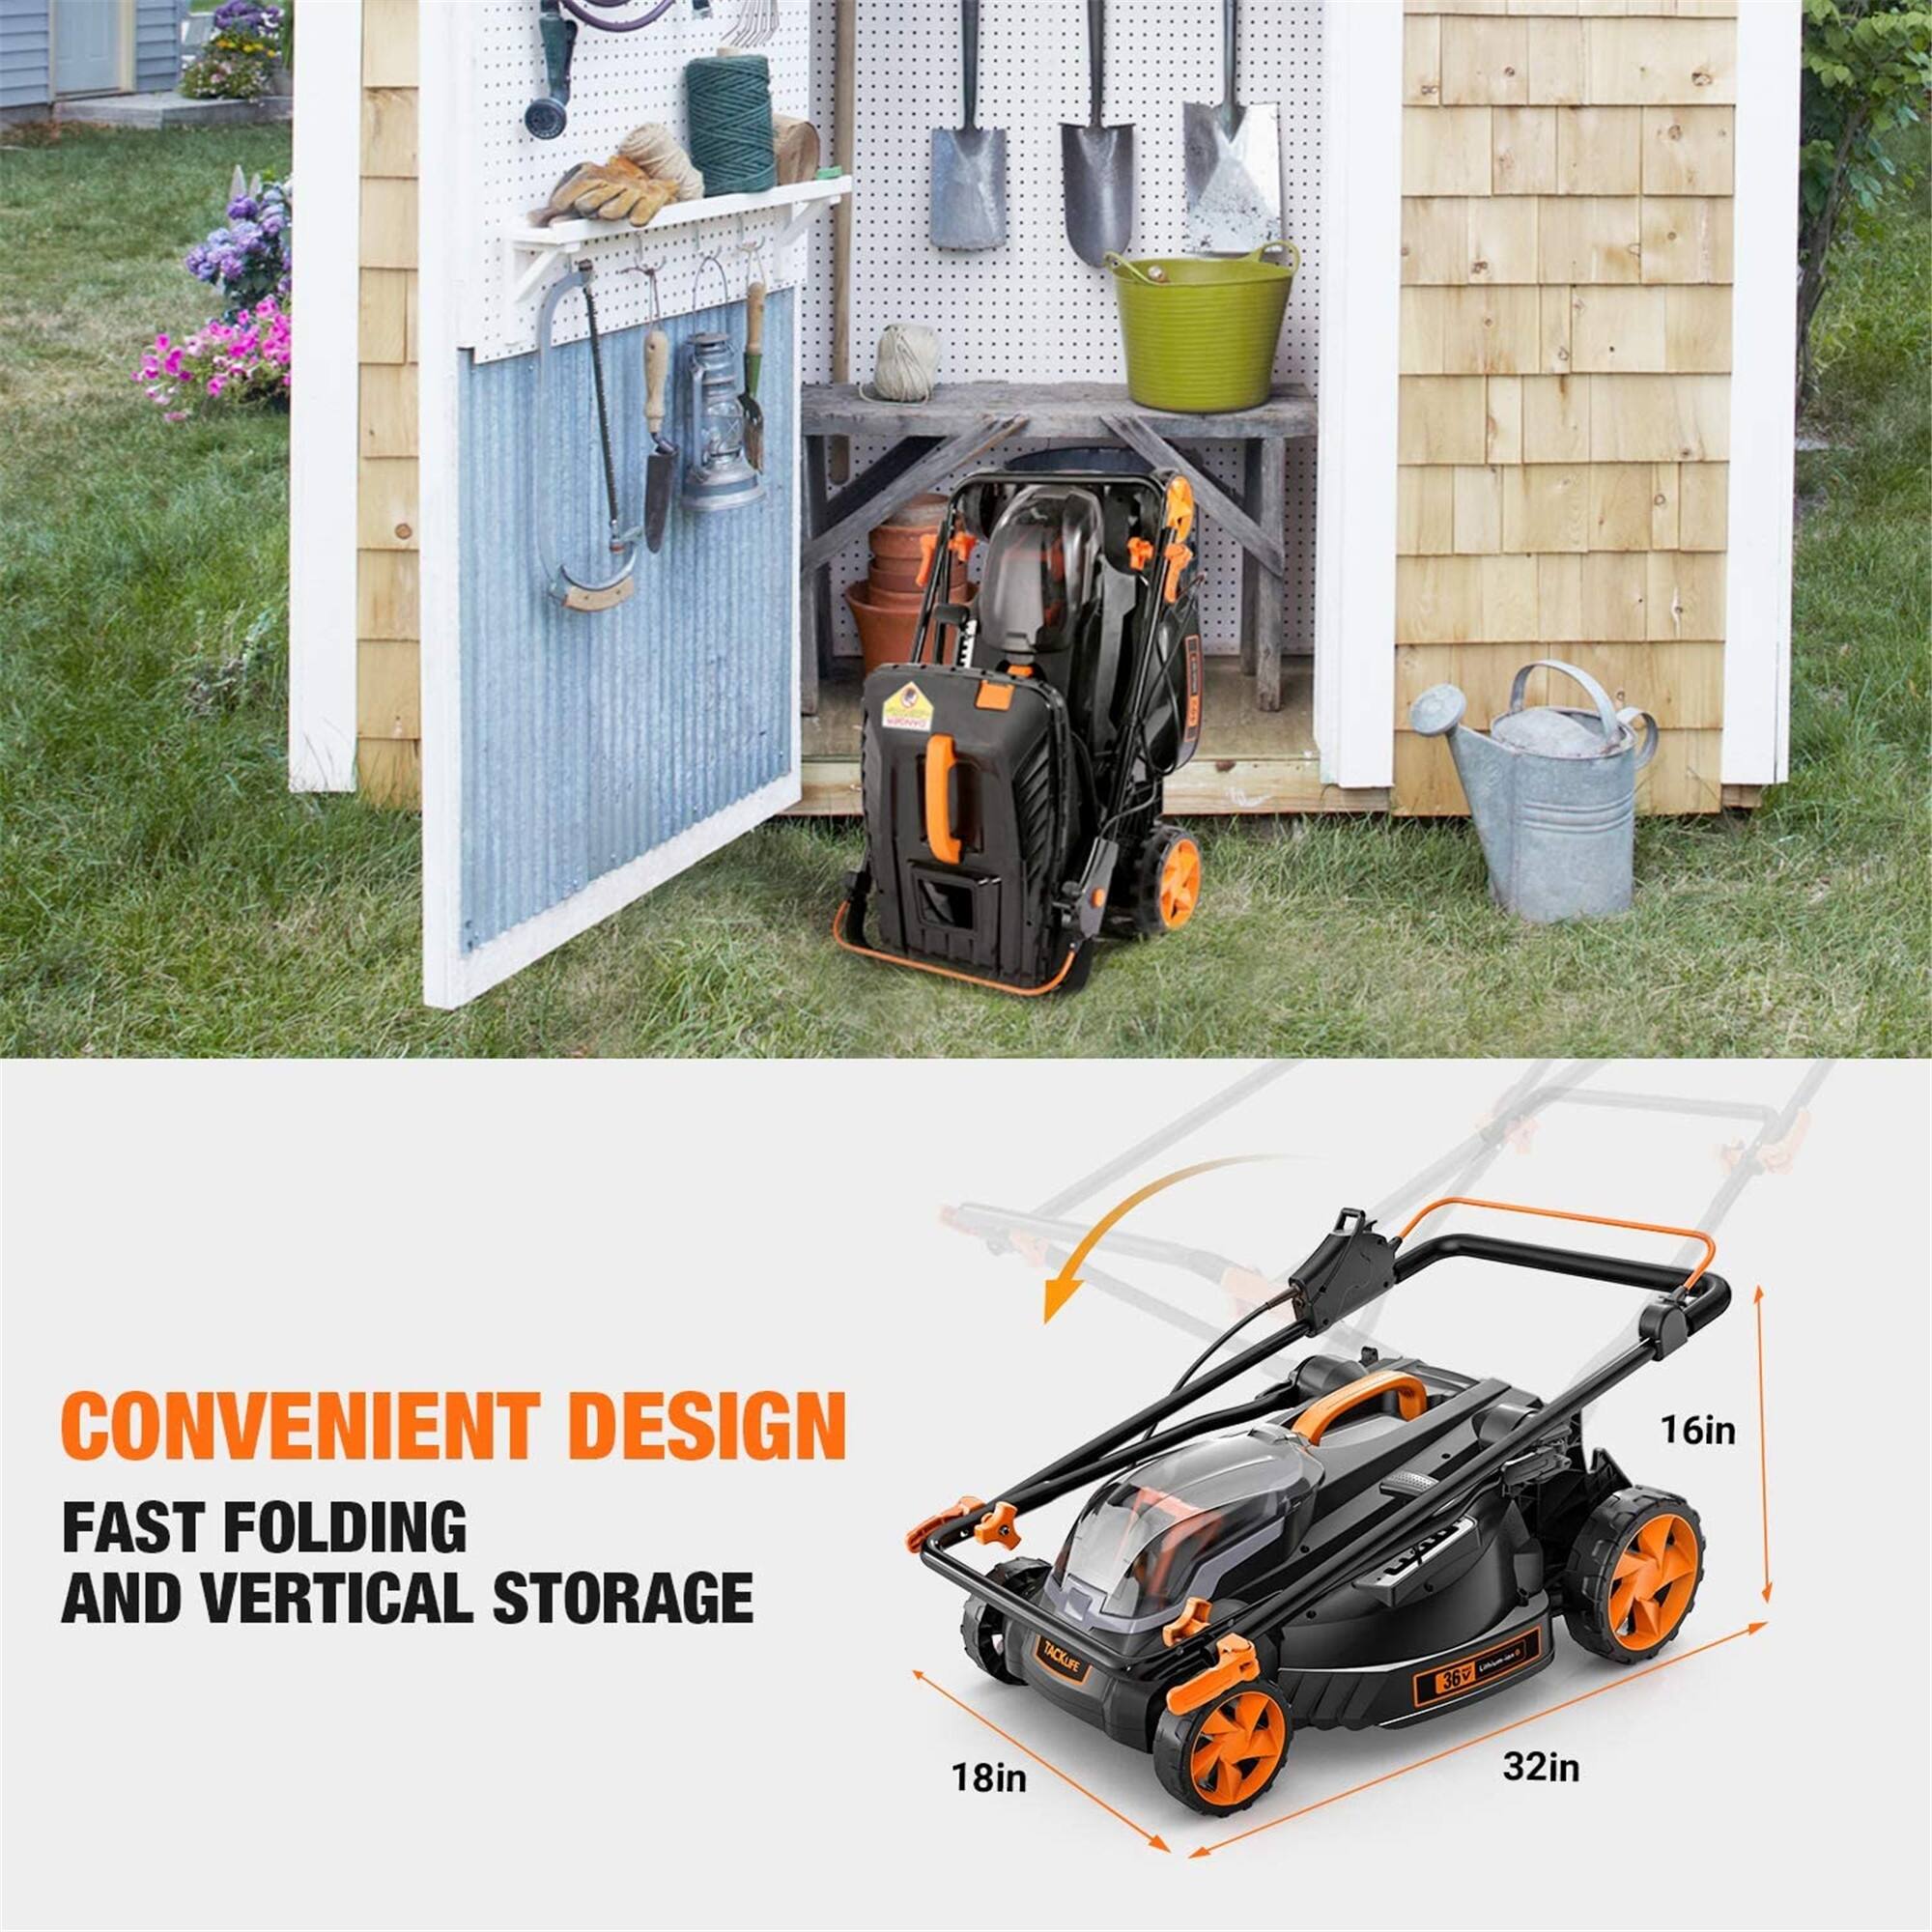 https://greatofferstock.com/ostkak1/images/products/is/images/direct/13bcc4300290355878b0bd2428cea7584481e10a/Cordless-Lawn-Mower%2C-16-Inch-40V-Brushless-Lawn-Mower%2C-4.0Ah-Battery%2C-98%25-Clean-Cutting-Rate%2C-10.5Gal-Grass-Box.jpg